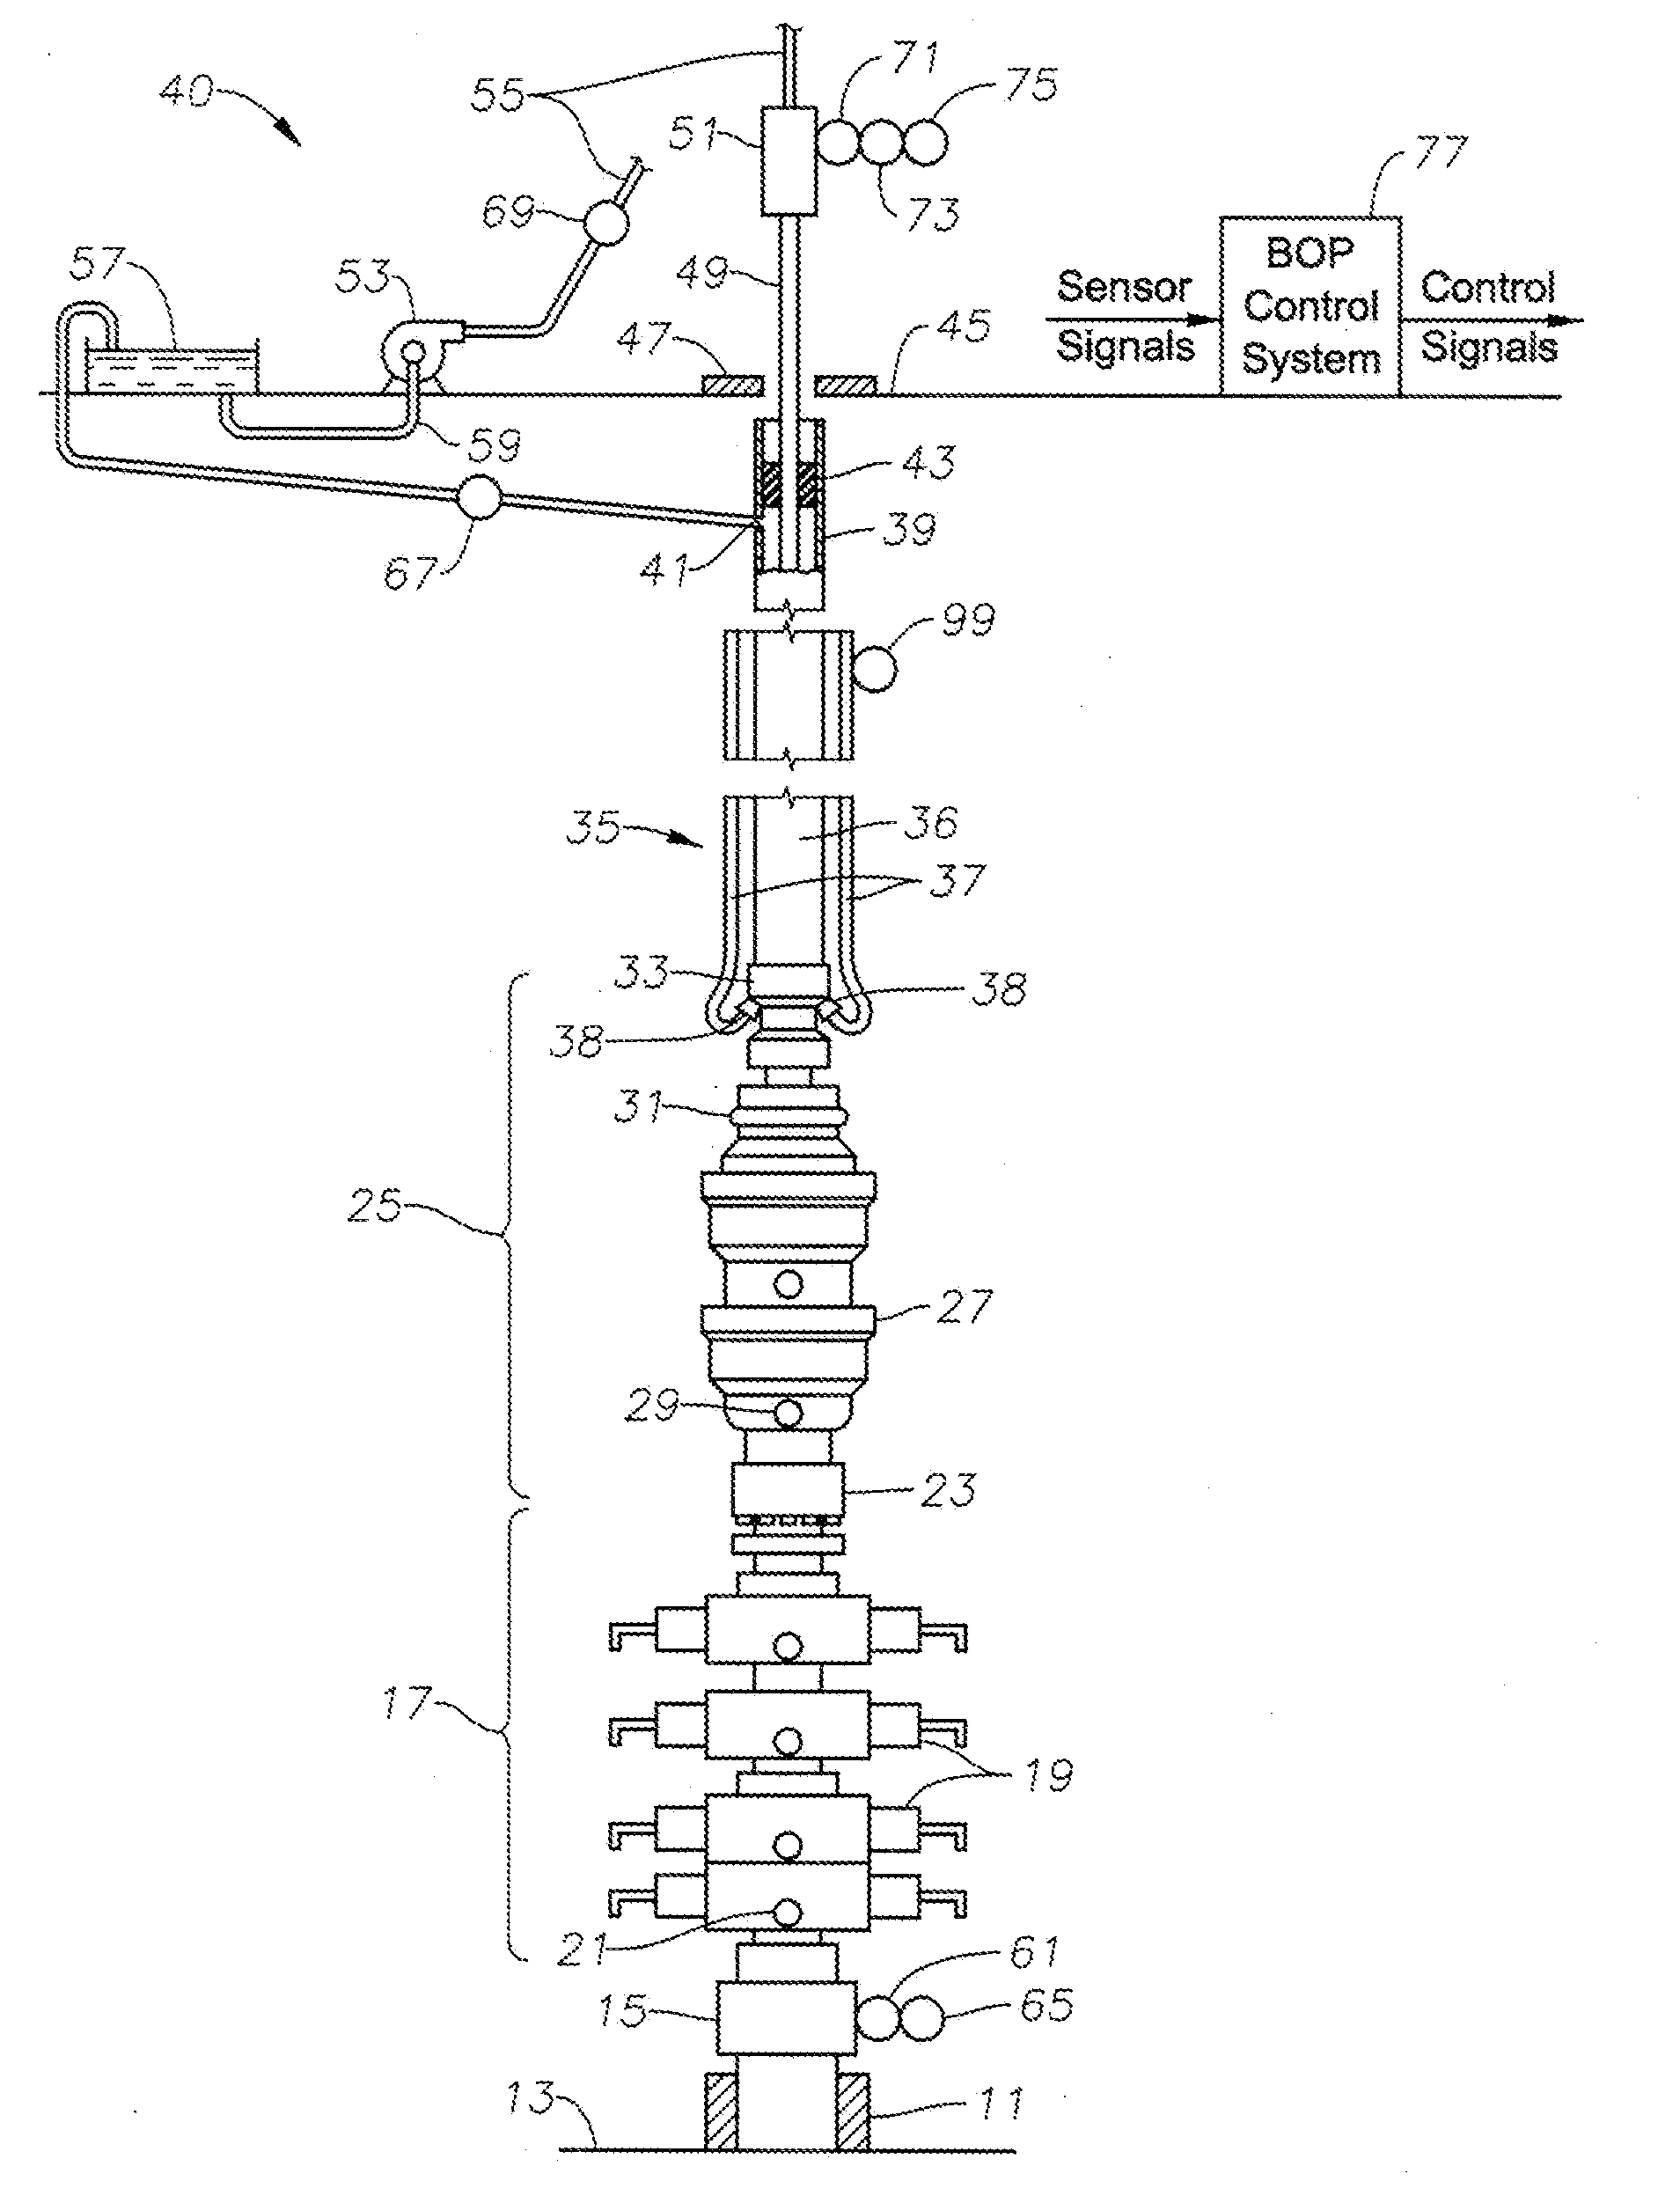 Automated Well Control Method and Apparatus